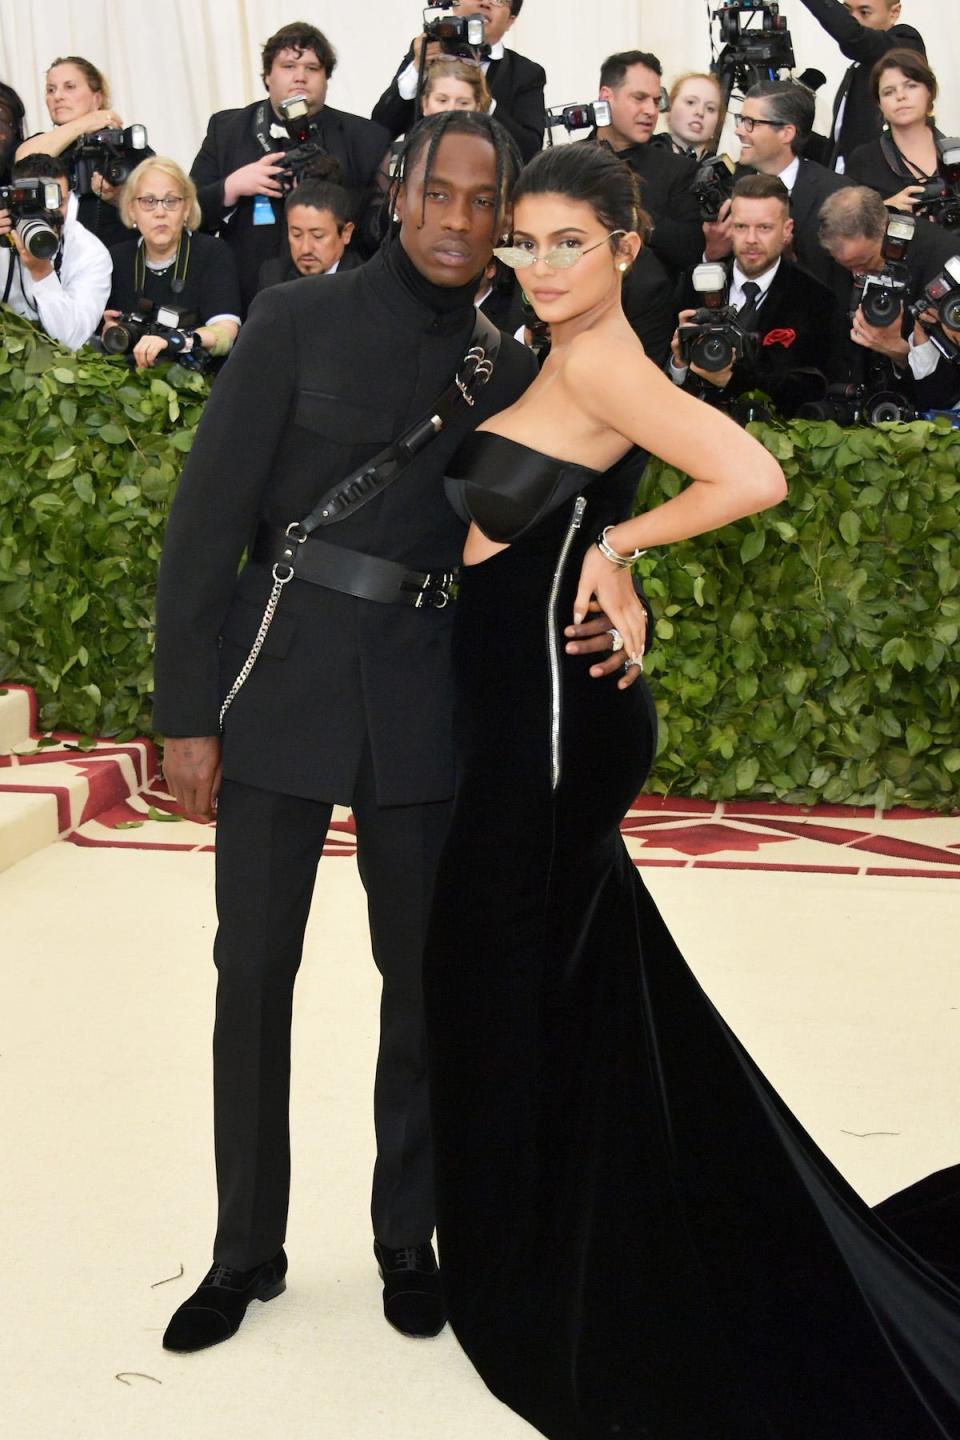 Travis Scott and Kylie Jenner attend the Met Gala 2018